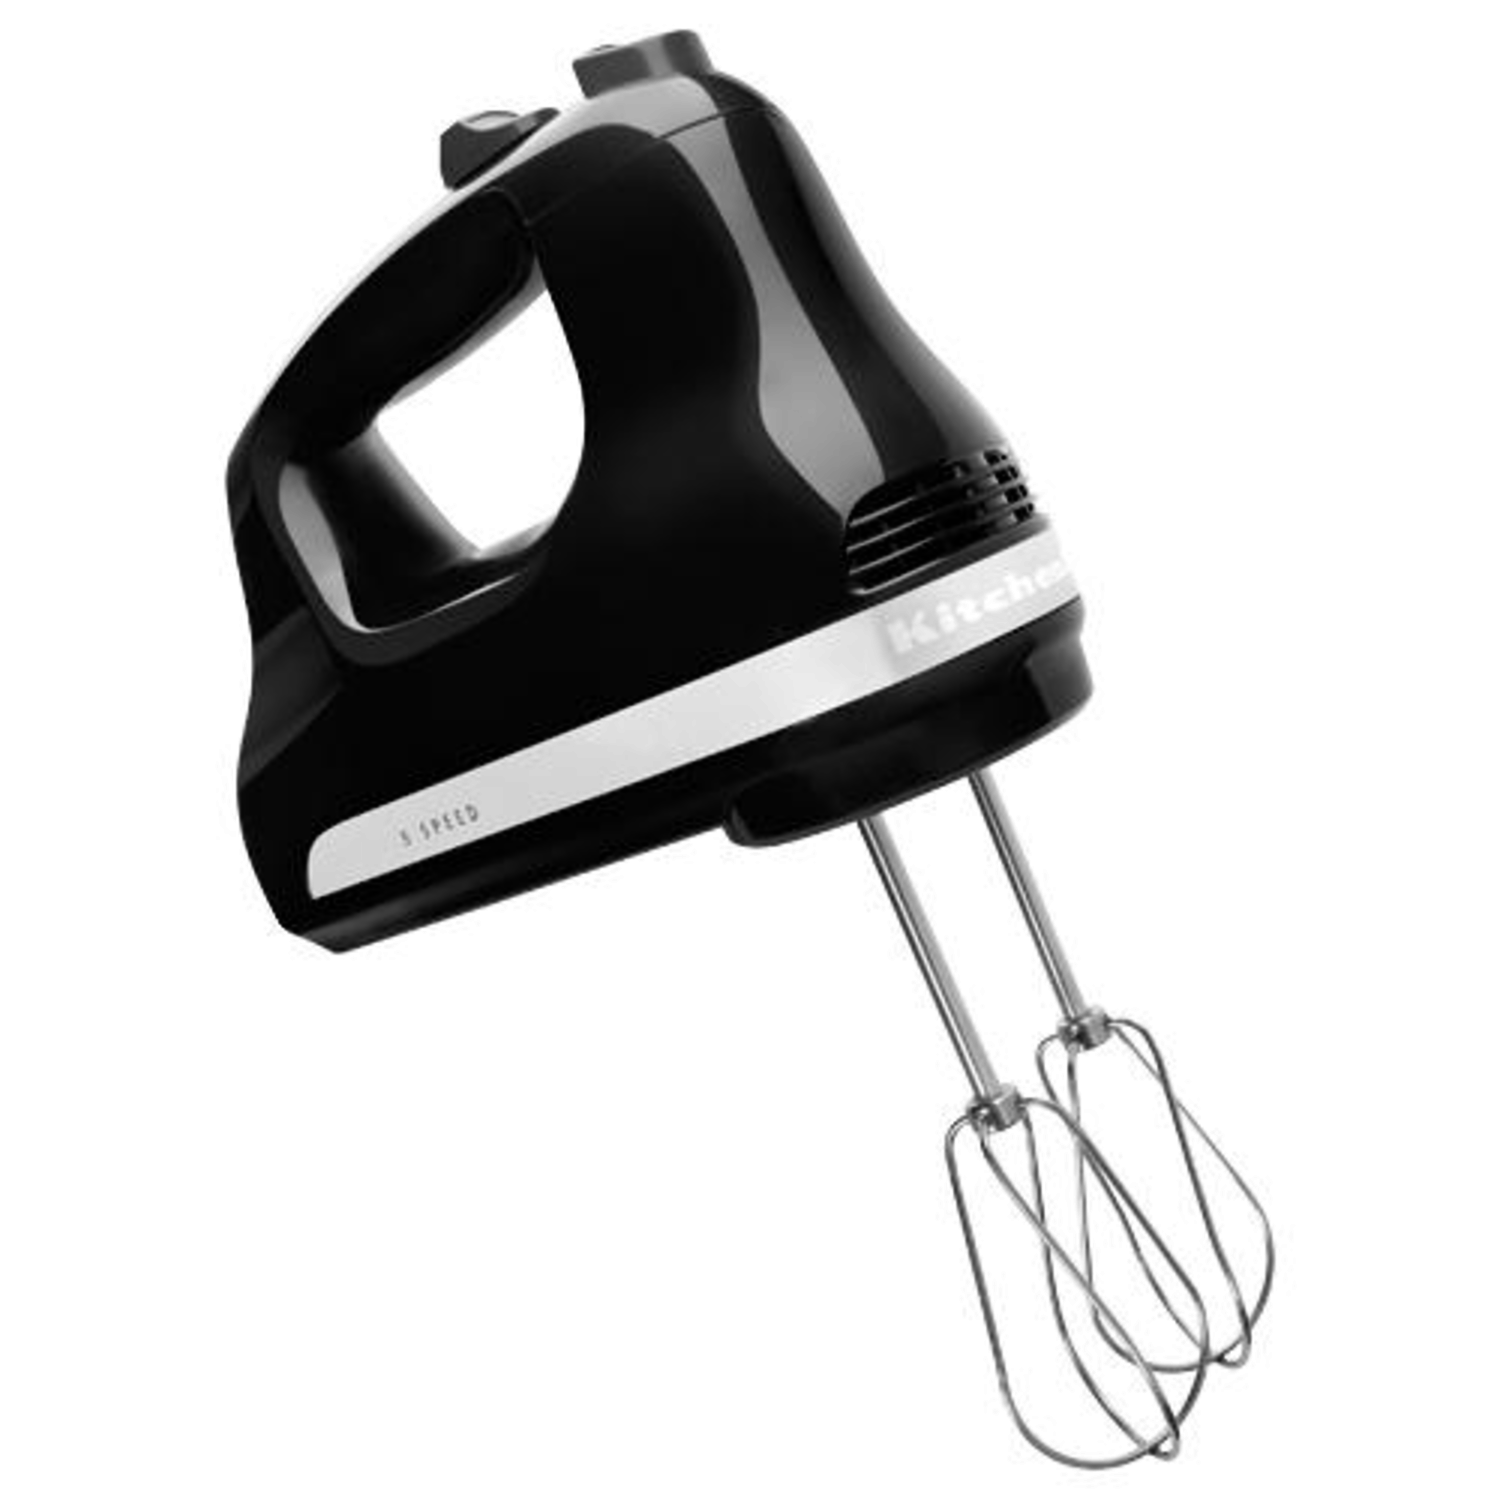 KitchenAid 7-Speed Onyx Black Hand Mixer with Beater and Whisk